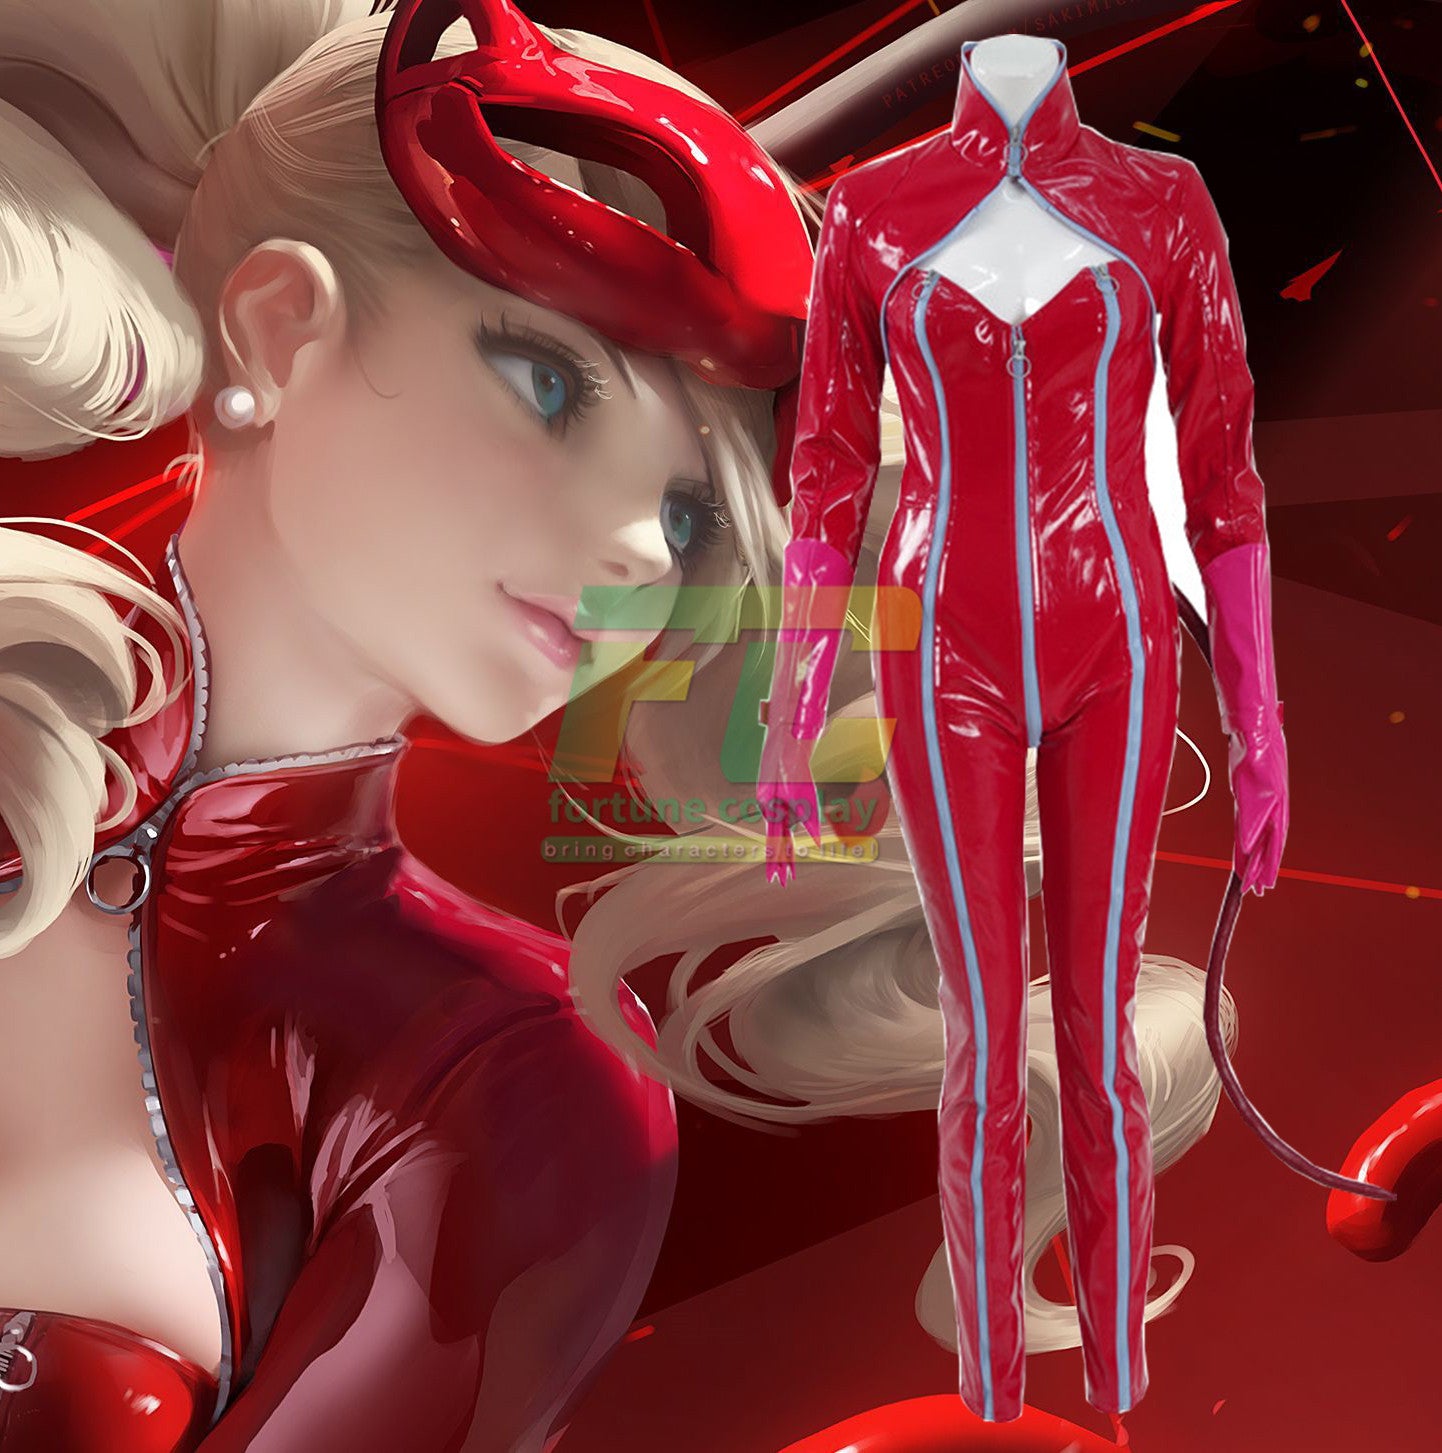 Free Shipping Persona 5 Anne Takamaki Cosplay Costumes Jump suit - fortunecosplay